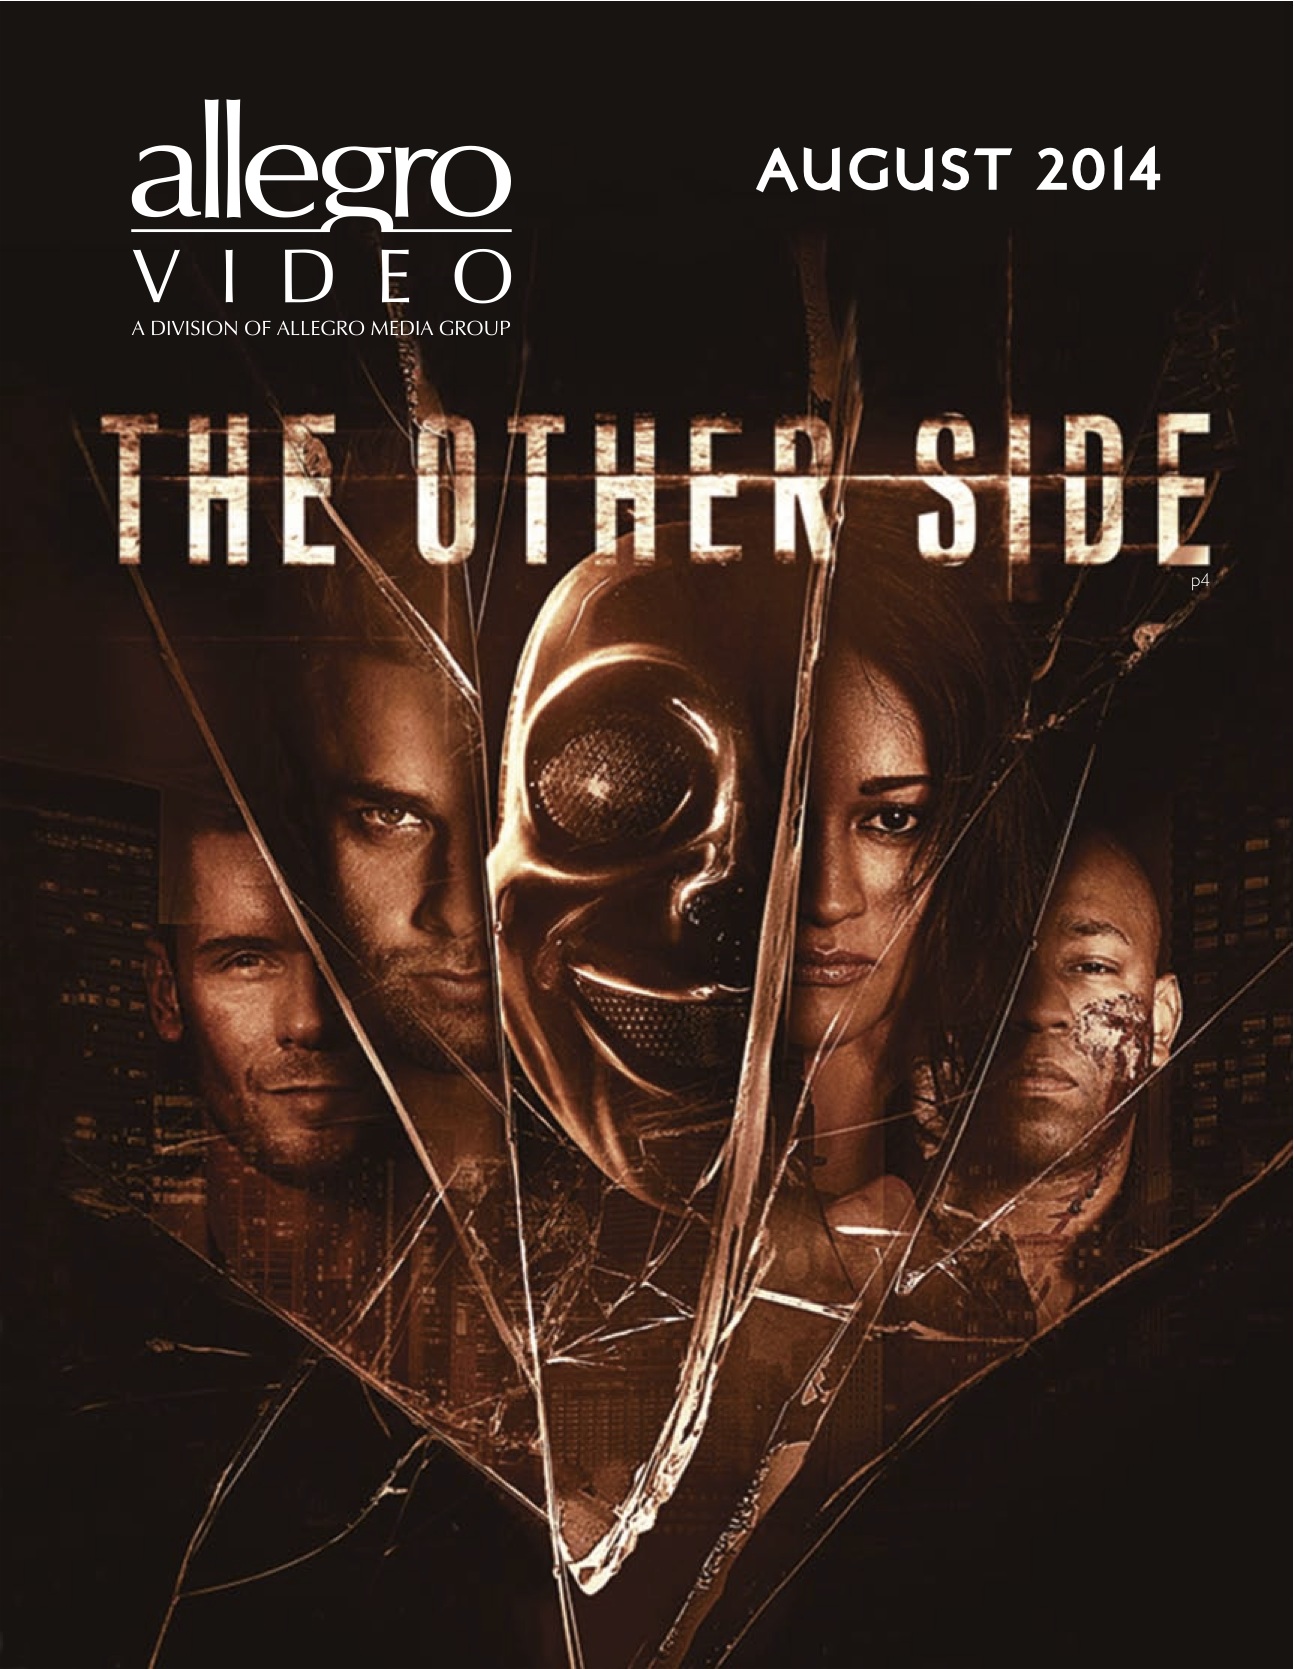 The Other Side (2014) Screenshot 1 